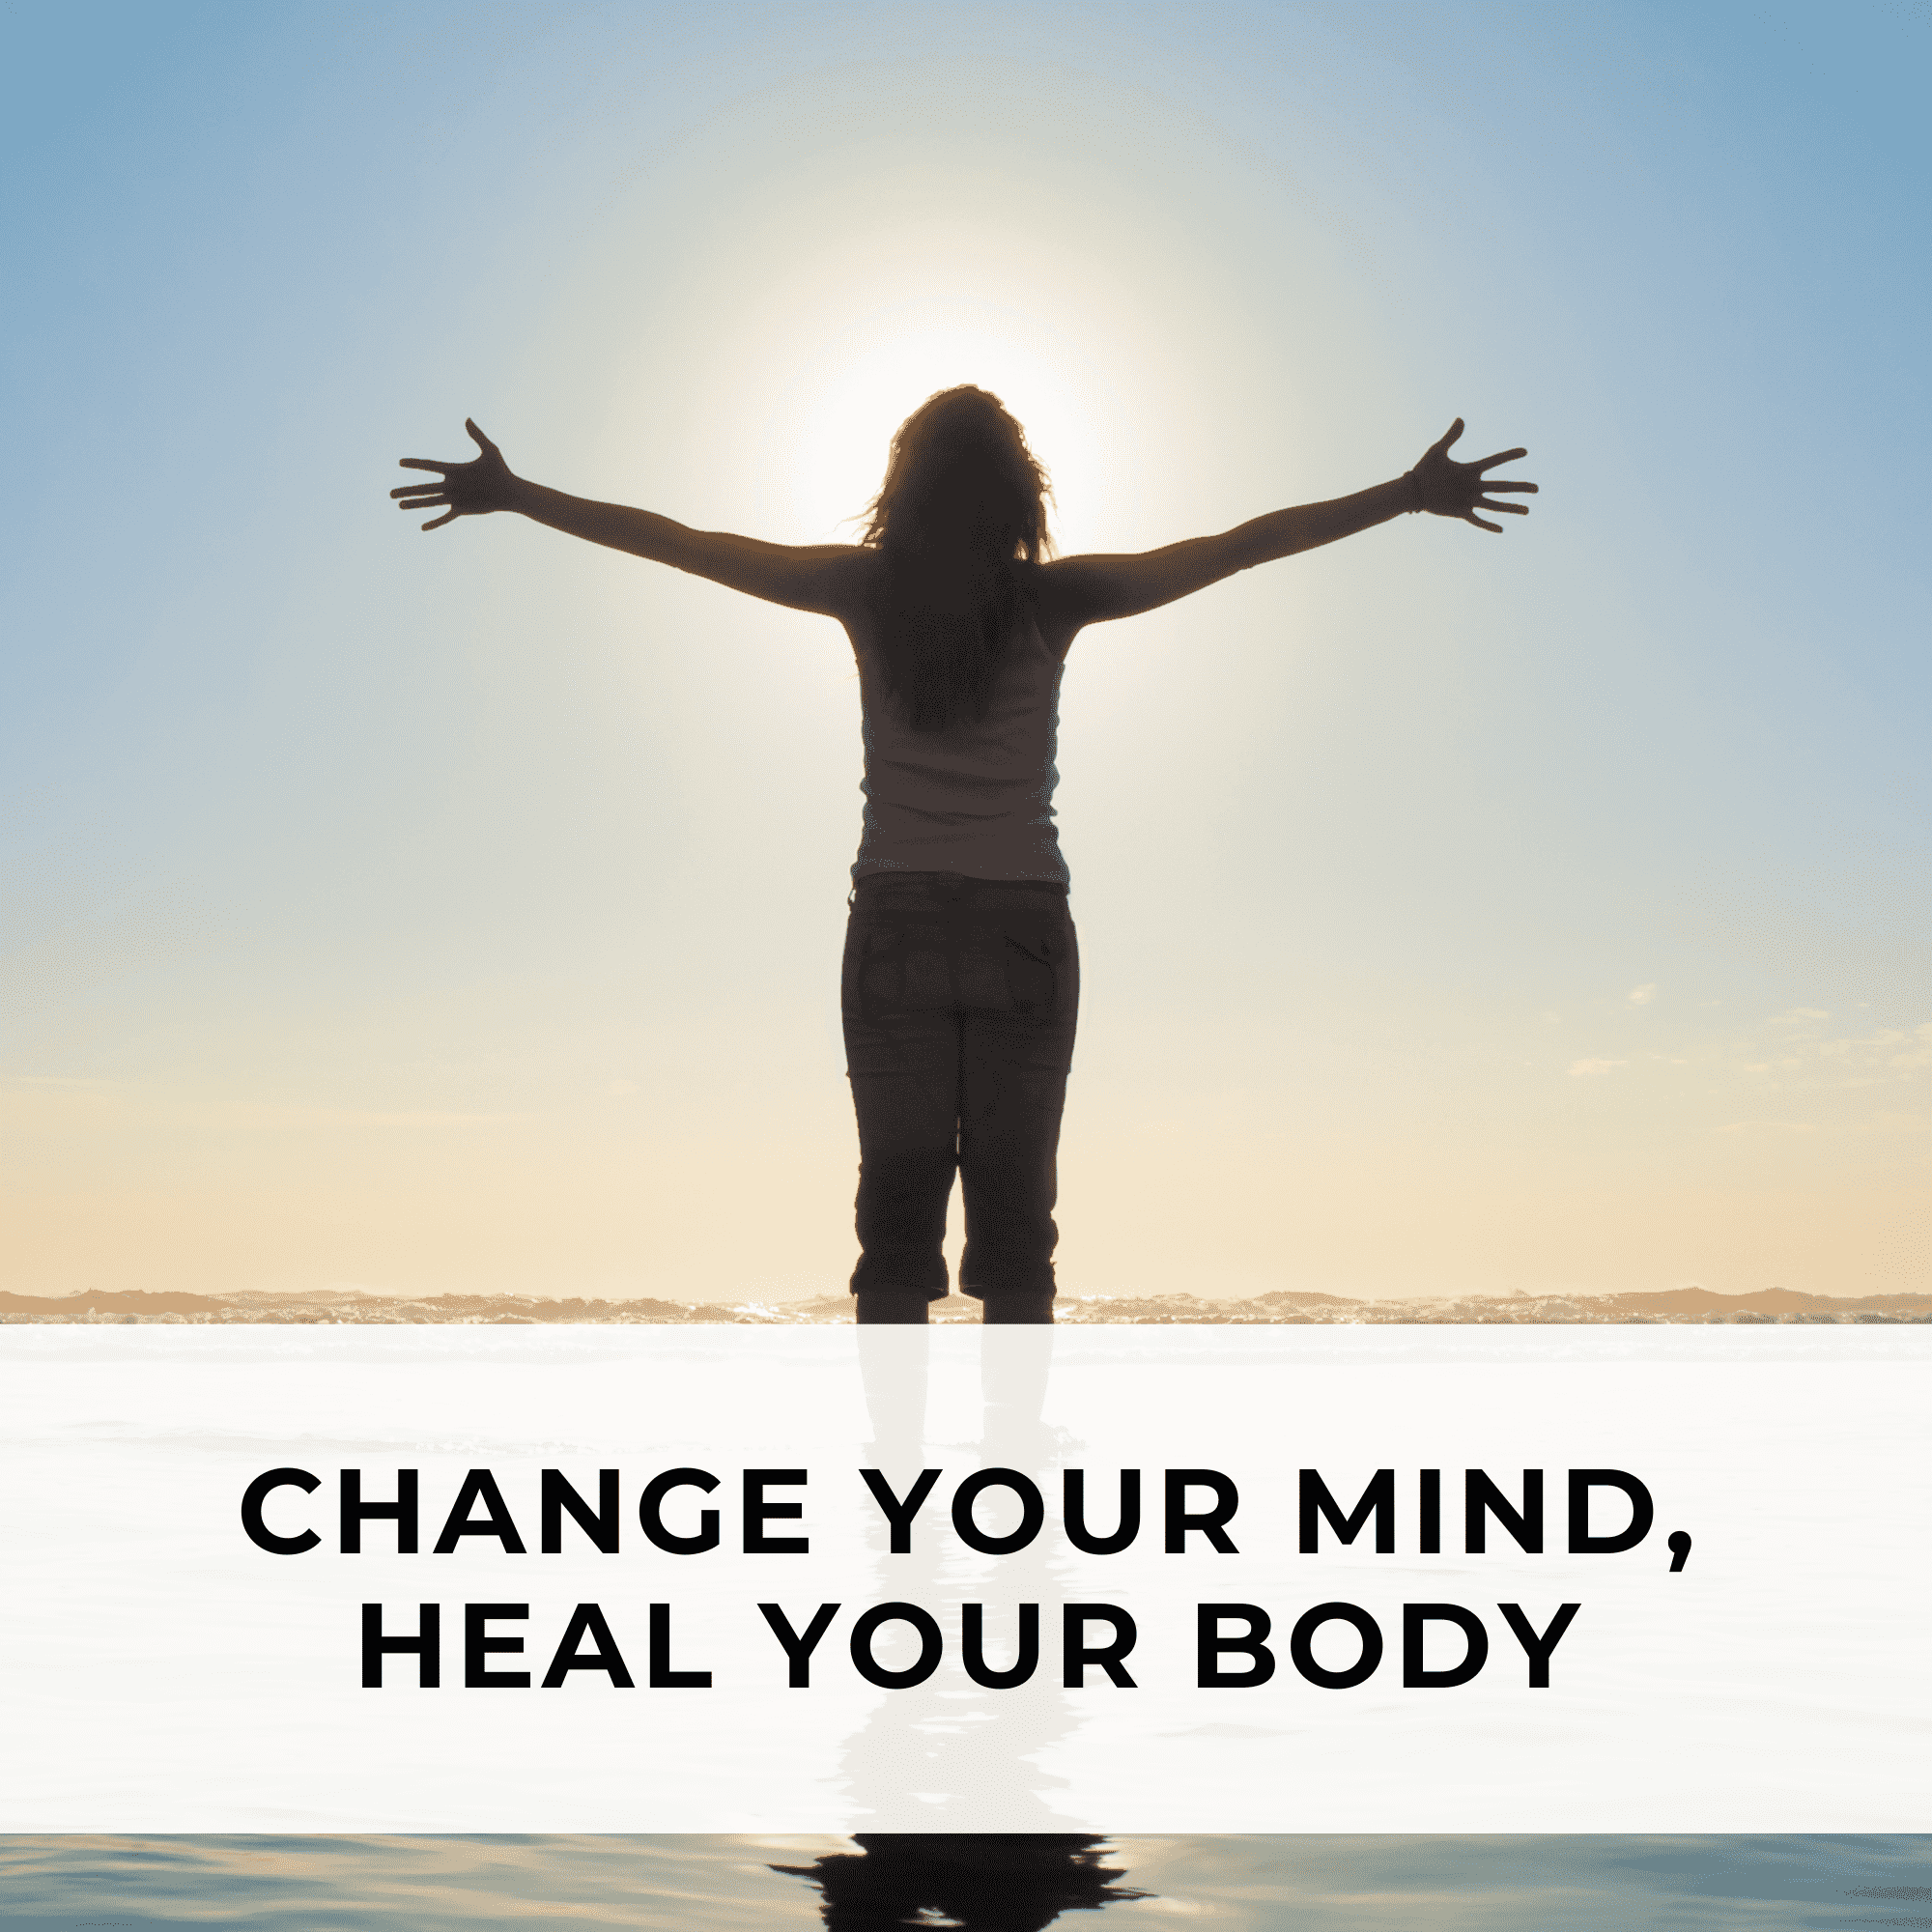 Change your mind heal your body